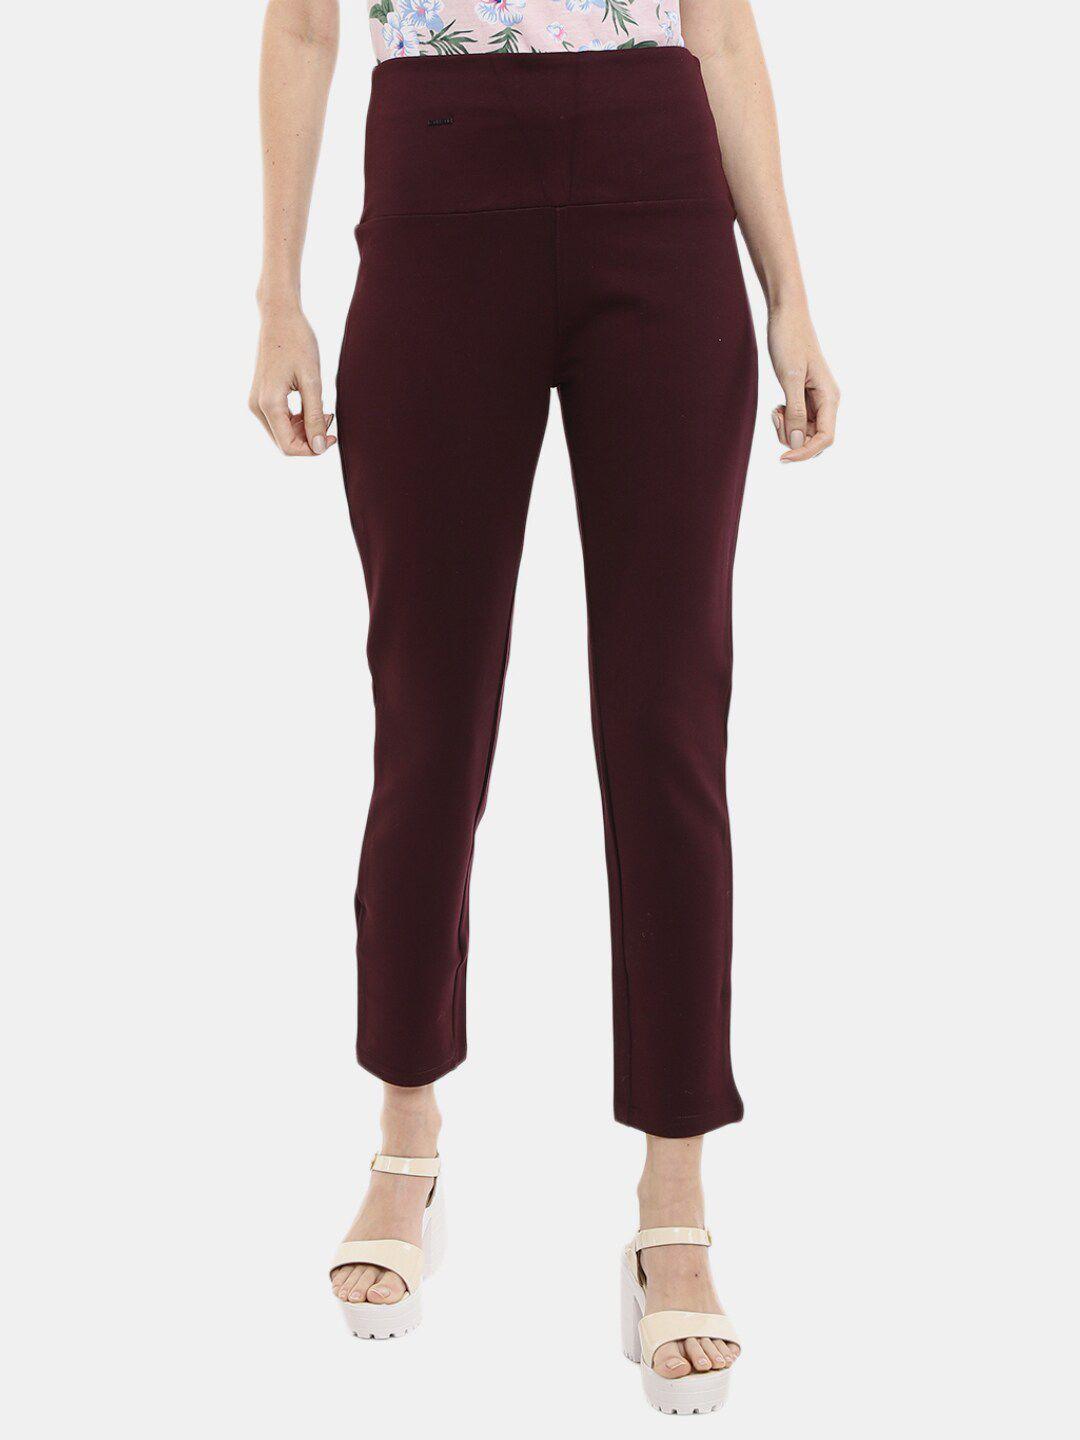 v-mart women wine red solid cotton woven jeggings